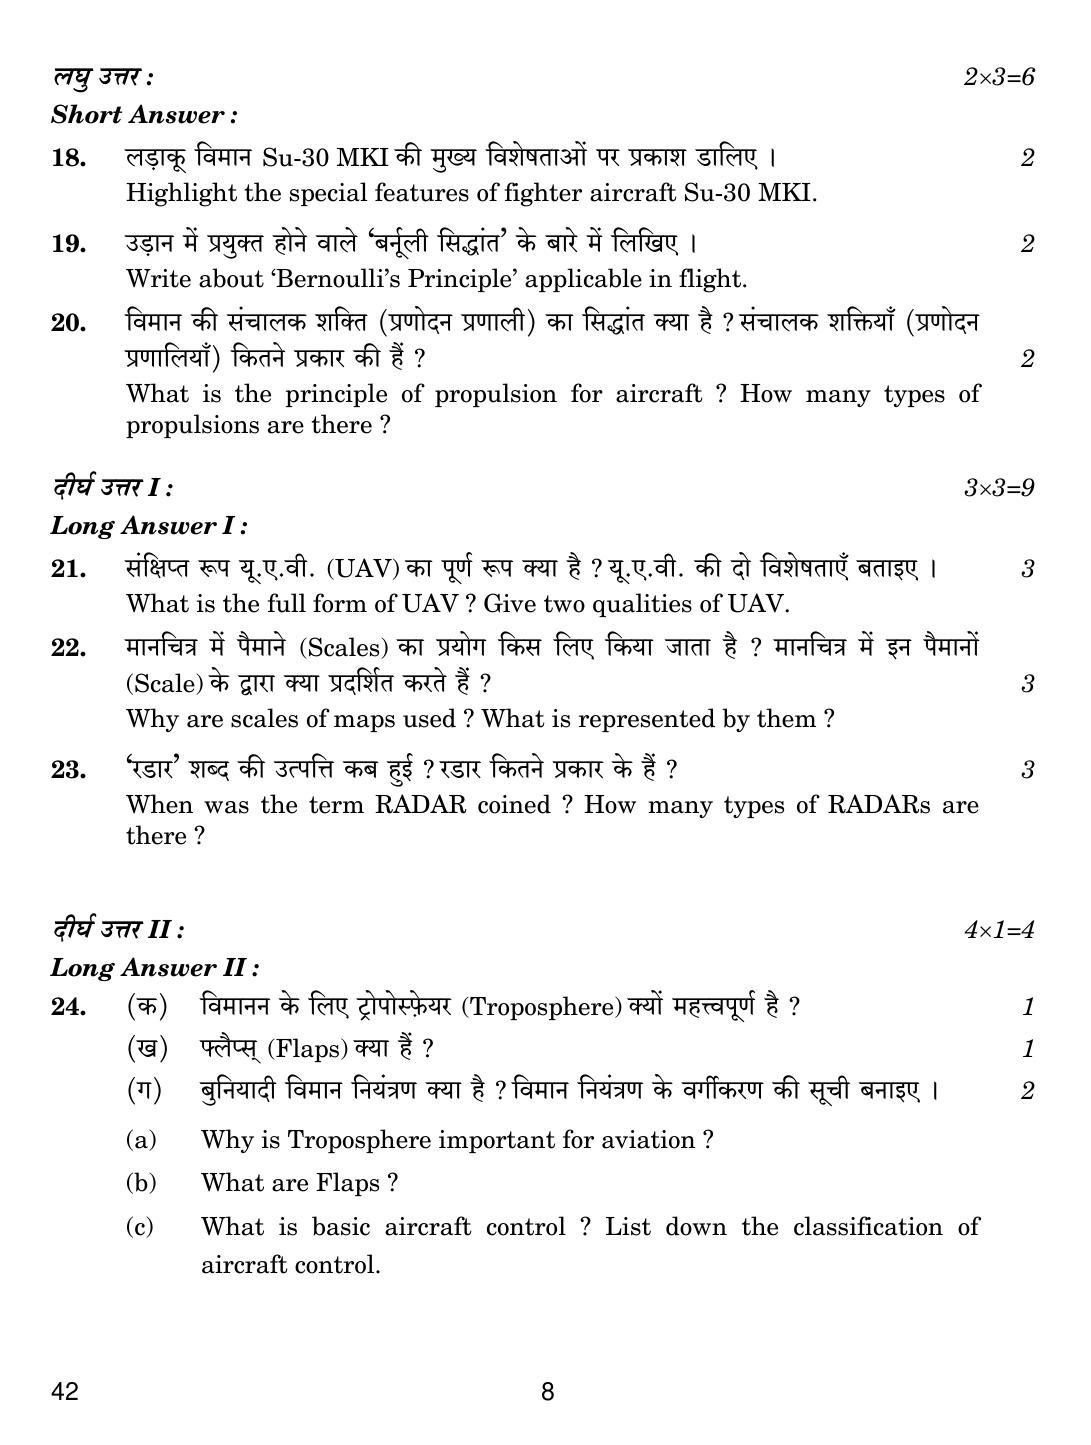 CBSE Class 12 42 National Cadet Corps (NCC) 2019 Question Paper - Page 8